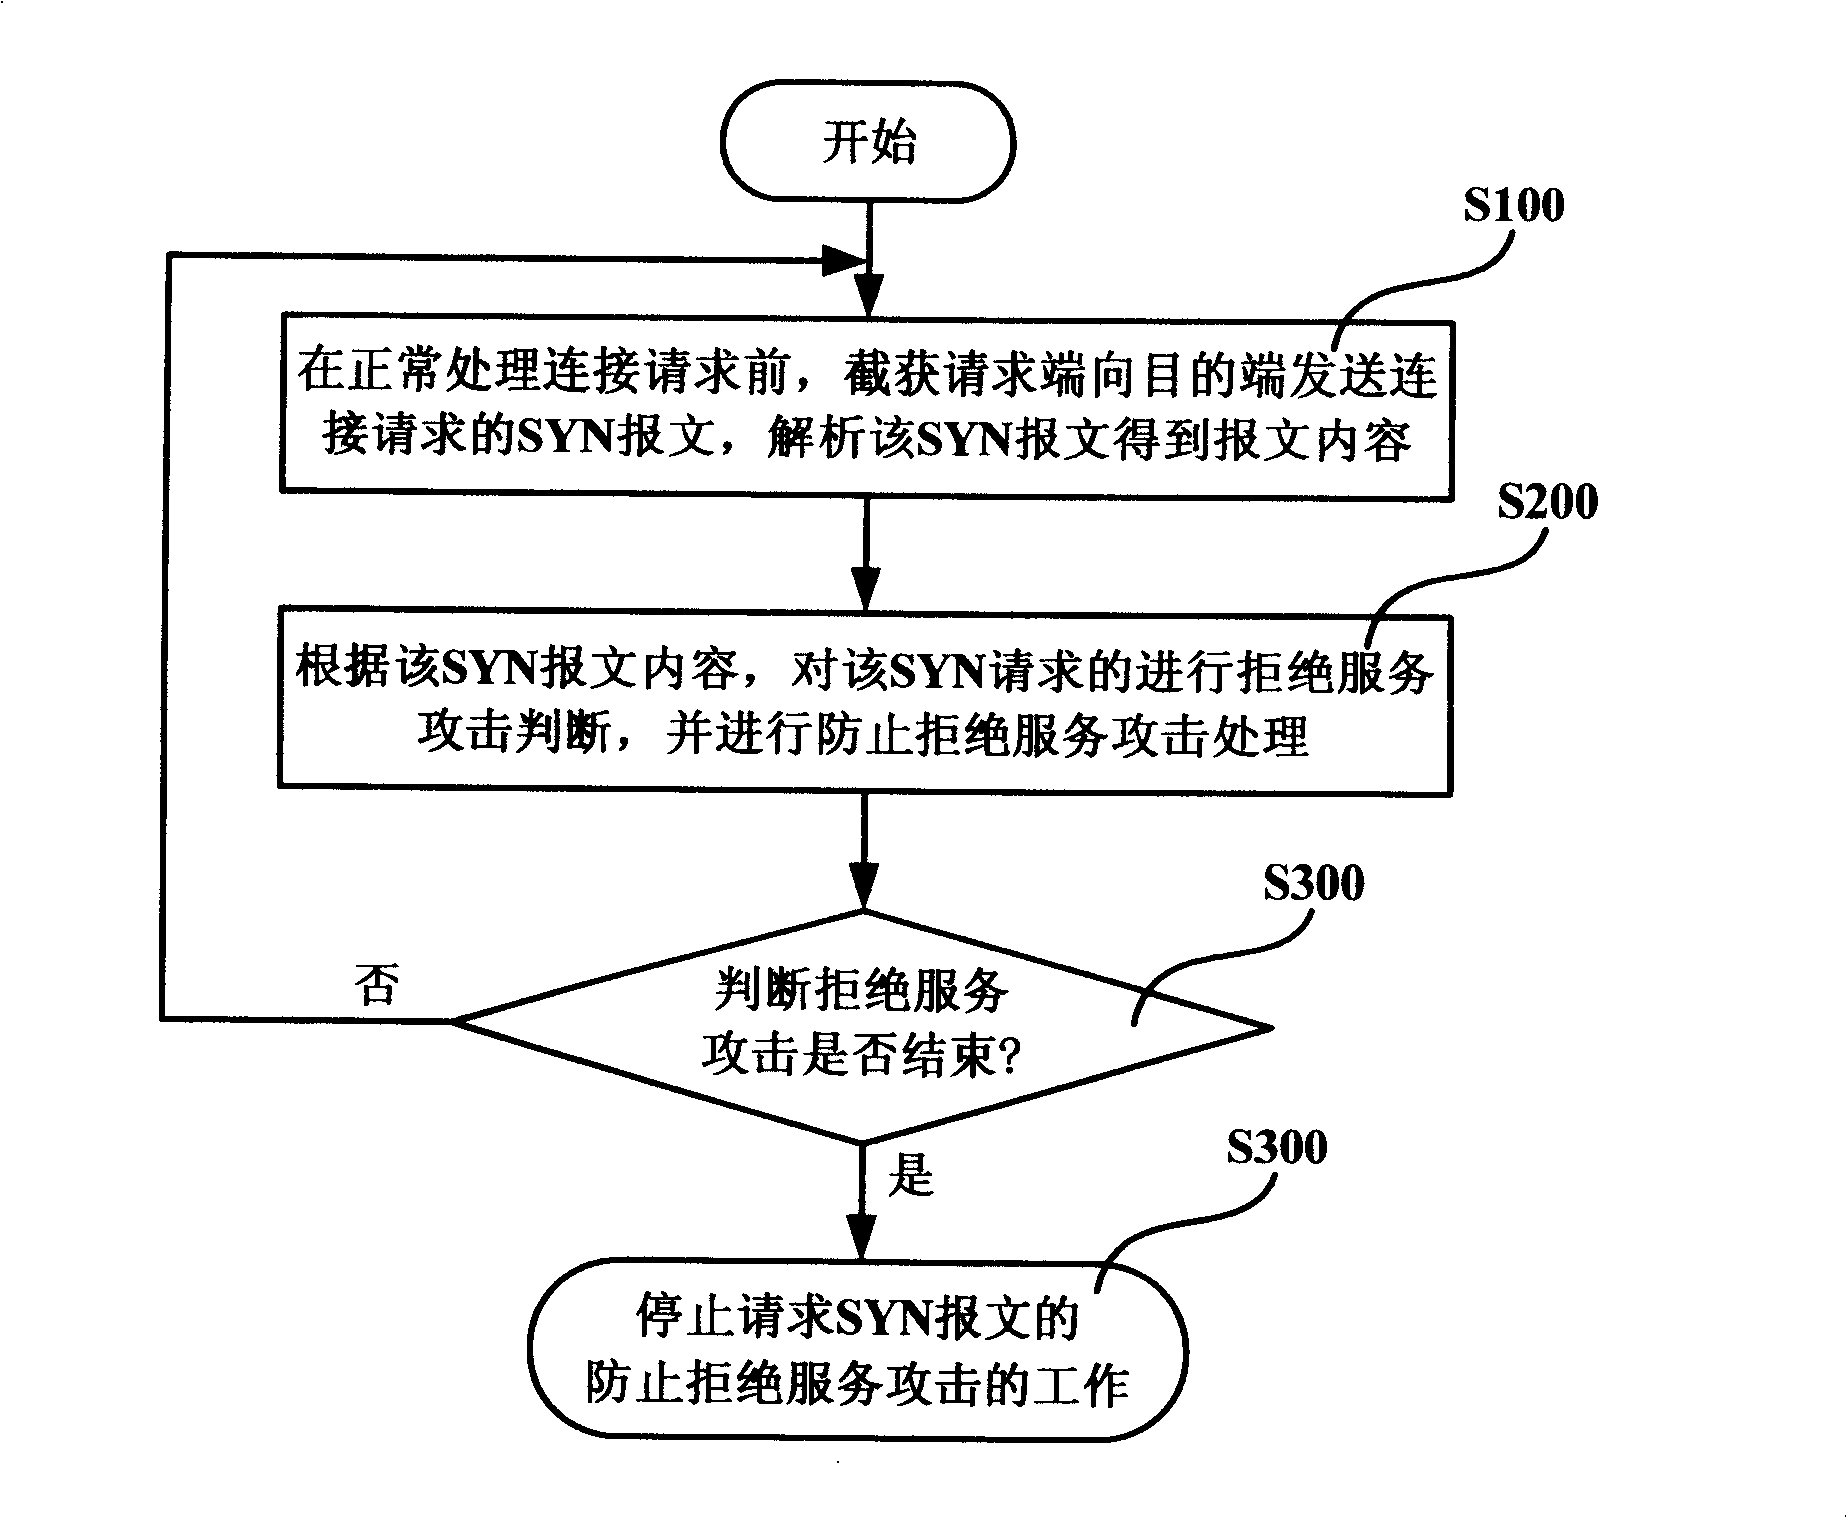 Method and system for preventing refusal service attack